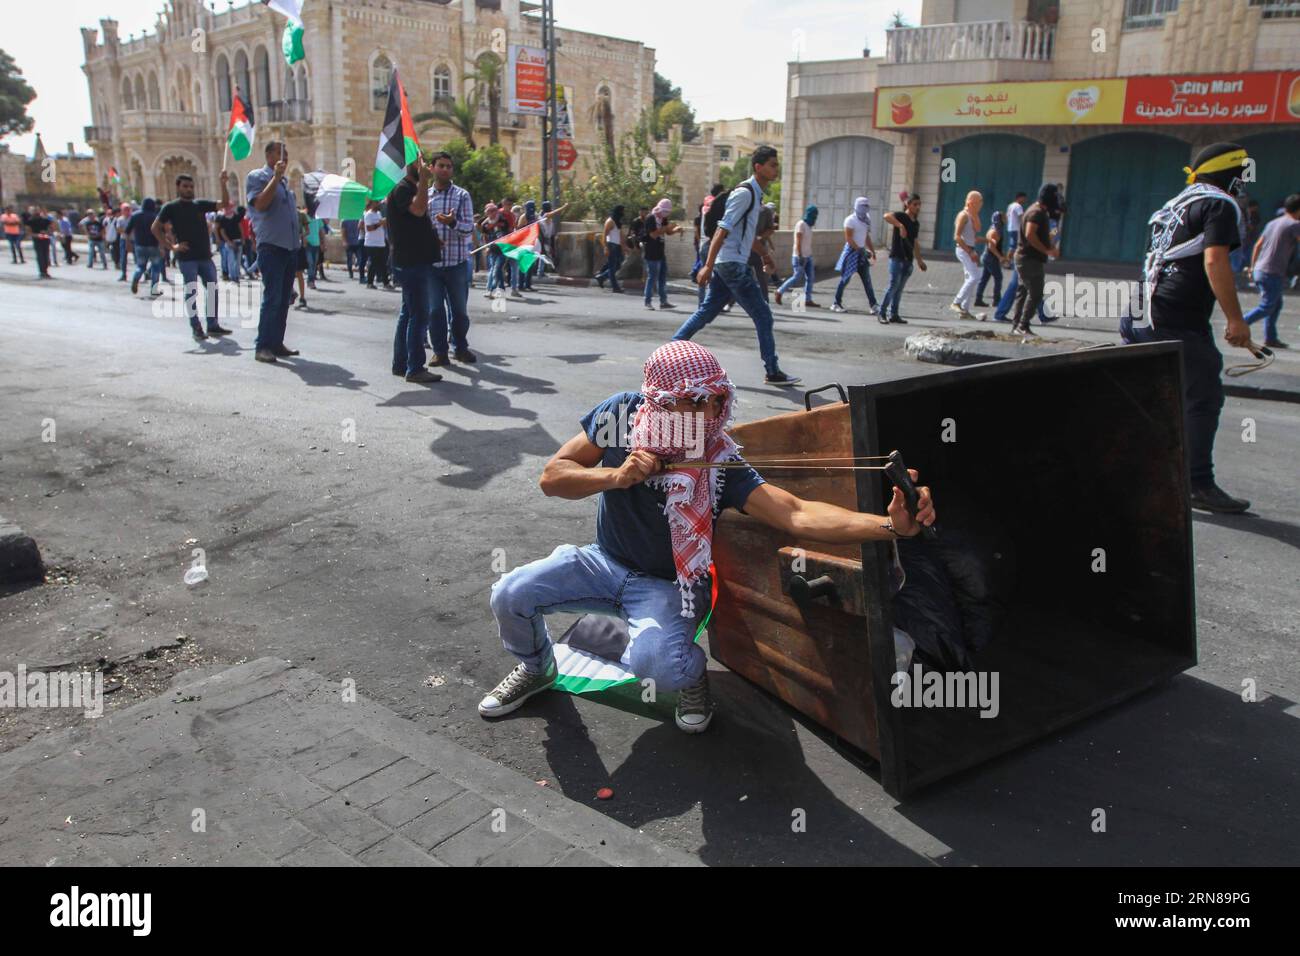 AKTUELLES ZEITGESCHEHEN Unruhen im Westjordanland (151014) -- BETHLEHEM,   A Palestinian protester shoots stones with a slingshot at Israeli soldiers during clashes in the West Bank city of Bethlehem on Oct. 13, 2015. ) MIDEAST-BETHLEHEM-CLASHES LuayxSababa PUBLICATIONxNOTxINxCHN   News Current events Unrest in West Jordan 151014 Bethlehem a PALESTINIAN protester Shoots Stones With a Slingshot AT Israeli Soldiers during clashes in The WEST Bank City of Bethlehem ON OCT 13 2015 Mideast Bethlehem clashes LuayxSababa PUBLICATIONxNOTxINxCHN Stock Photo